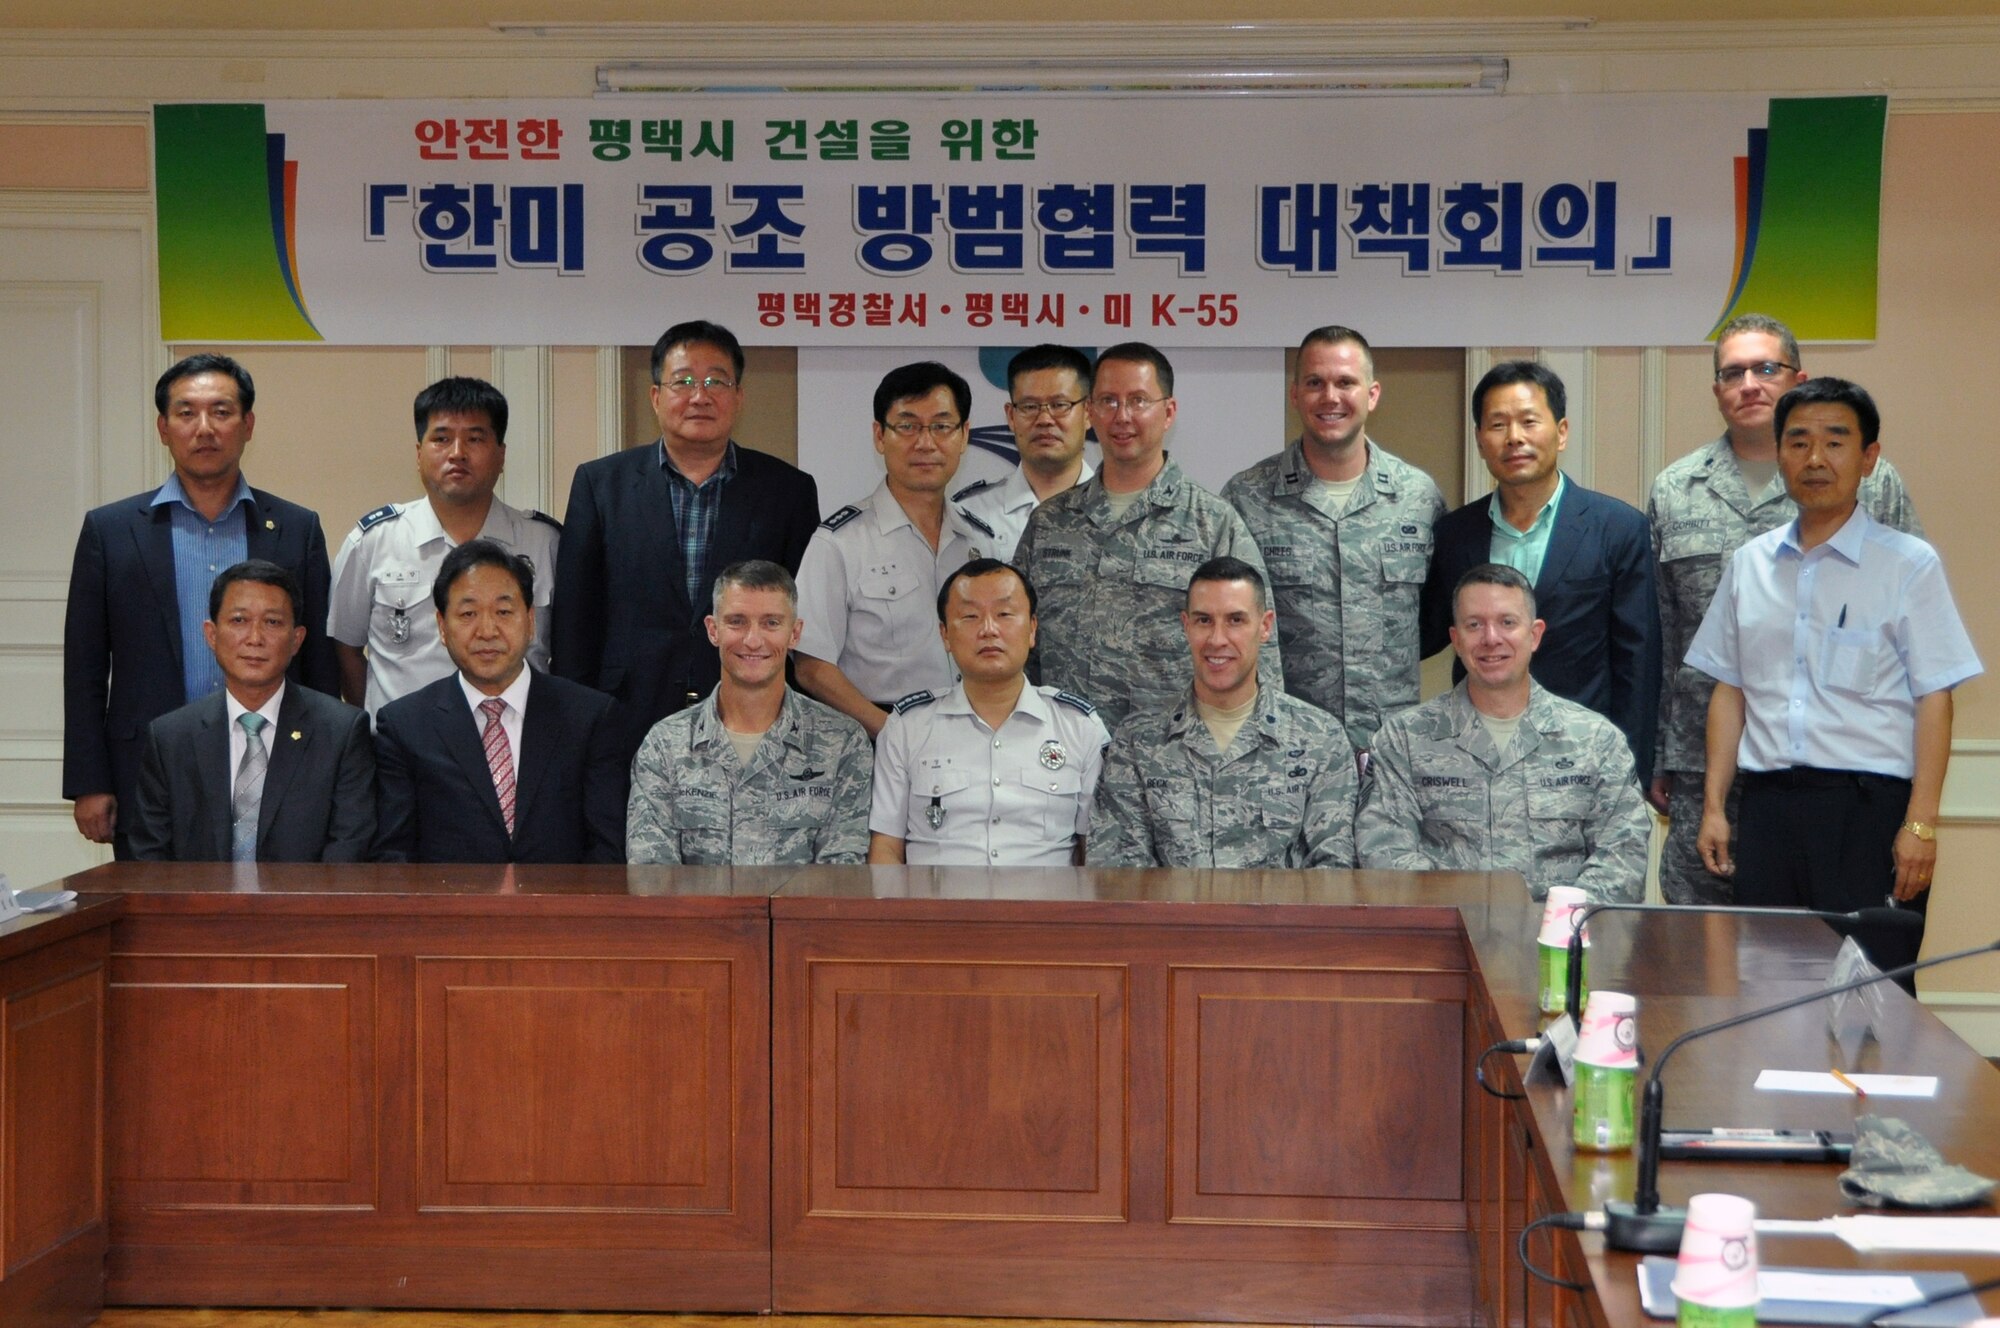 Airmen of the 51st Fighter Wing and city officials pose for a group photo following a Town Patrol Cooperation Meeting in Pyeongteak, Republic of Korea, July 10, 2012. The commanders and city officials discussed joint town patrols, Korean Nation Police assistance with parking restrictions, the off-limits establishments to U.S. Forces Korea personnel and expanding the Osan and Songtan Community Advisory Council. (U.S. Air Force photo)